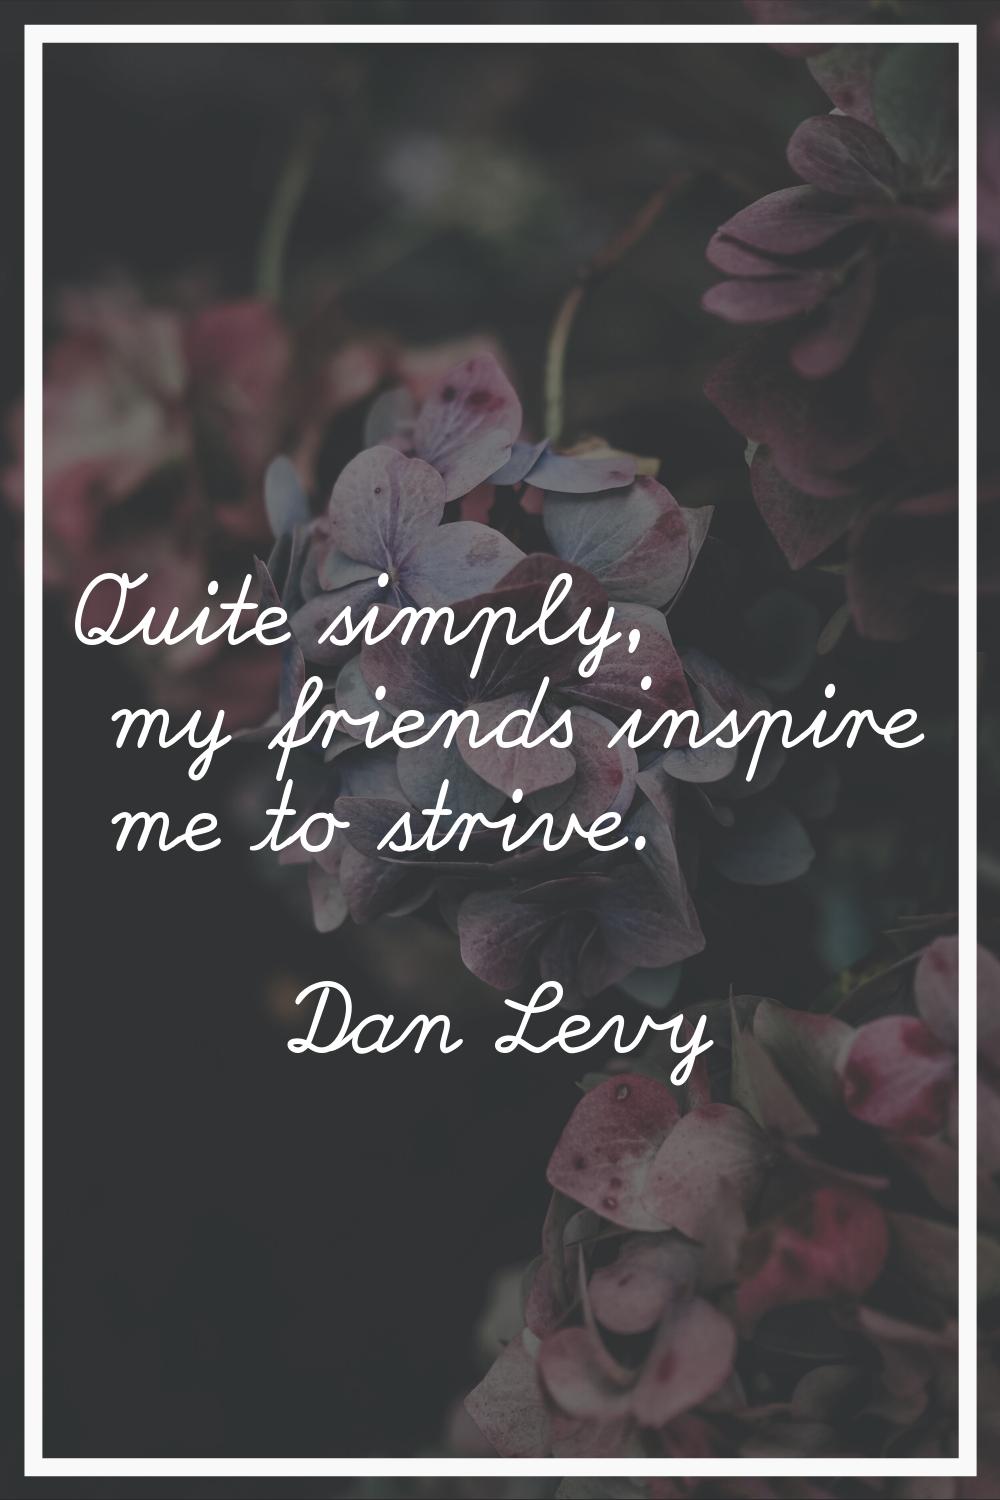 Quite simply, my friends inspire me to strive.